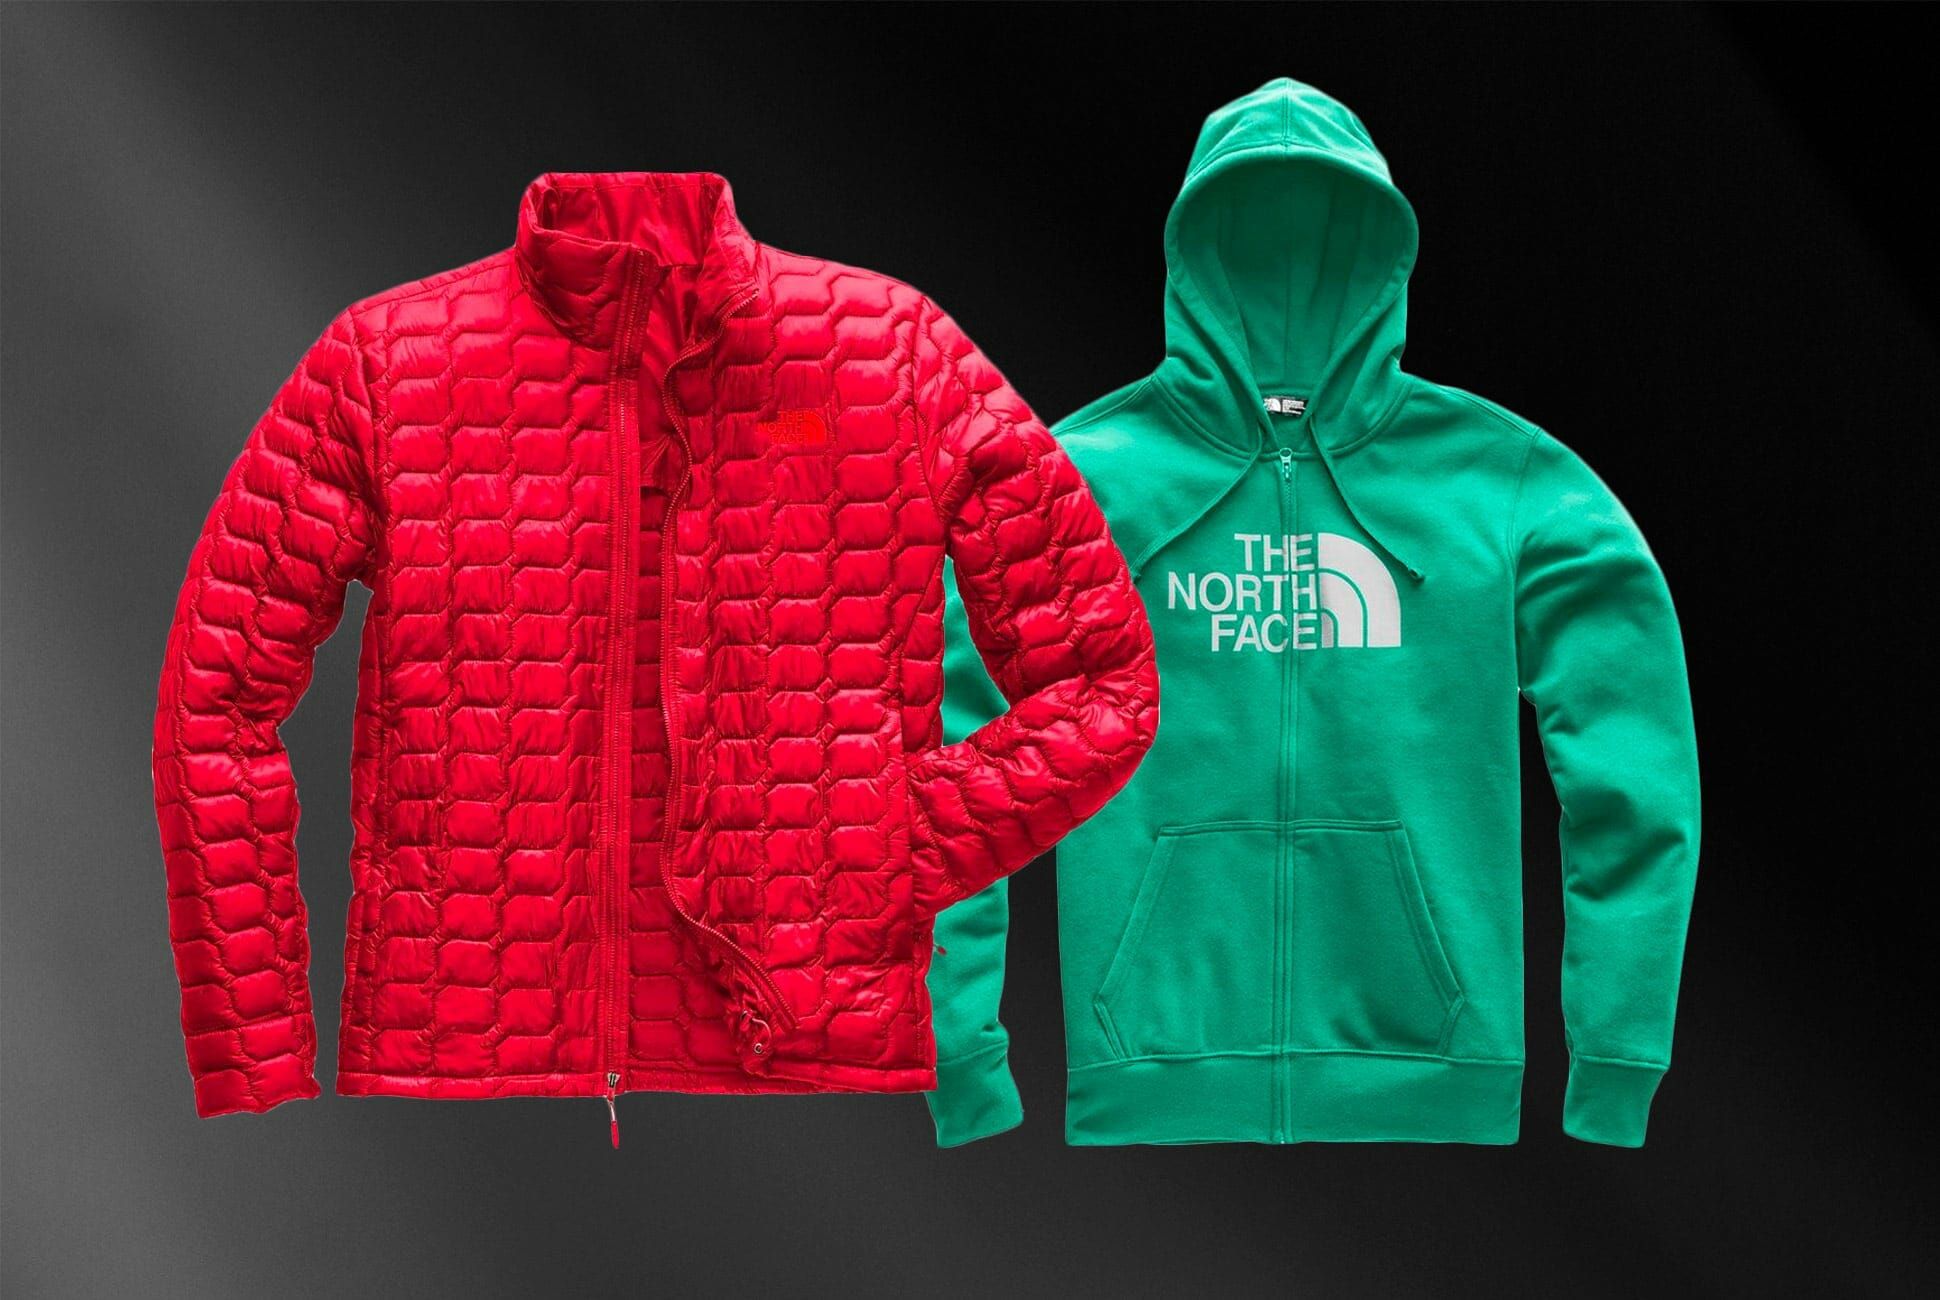 north face cyber monday 2018